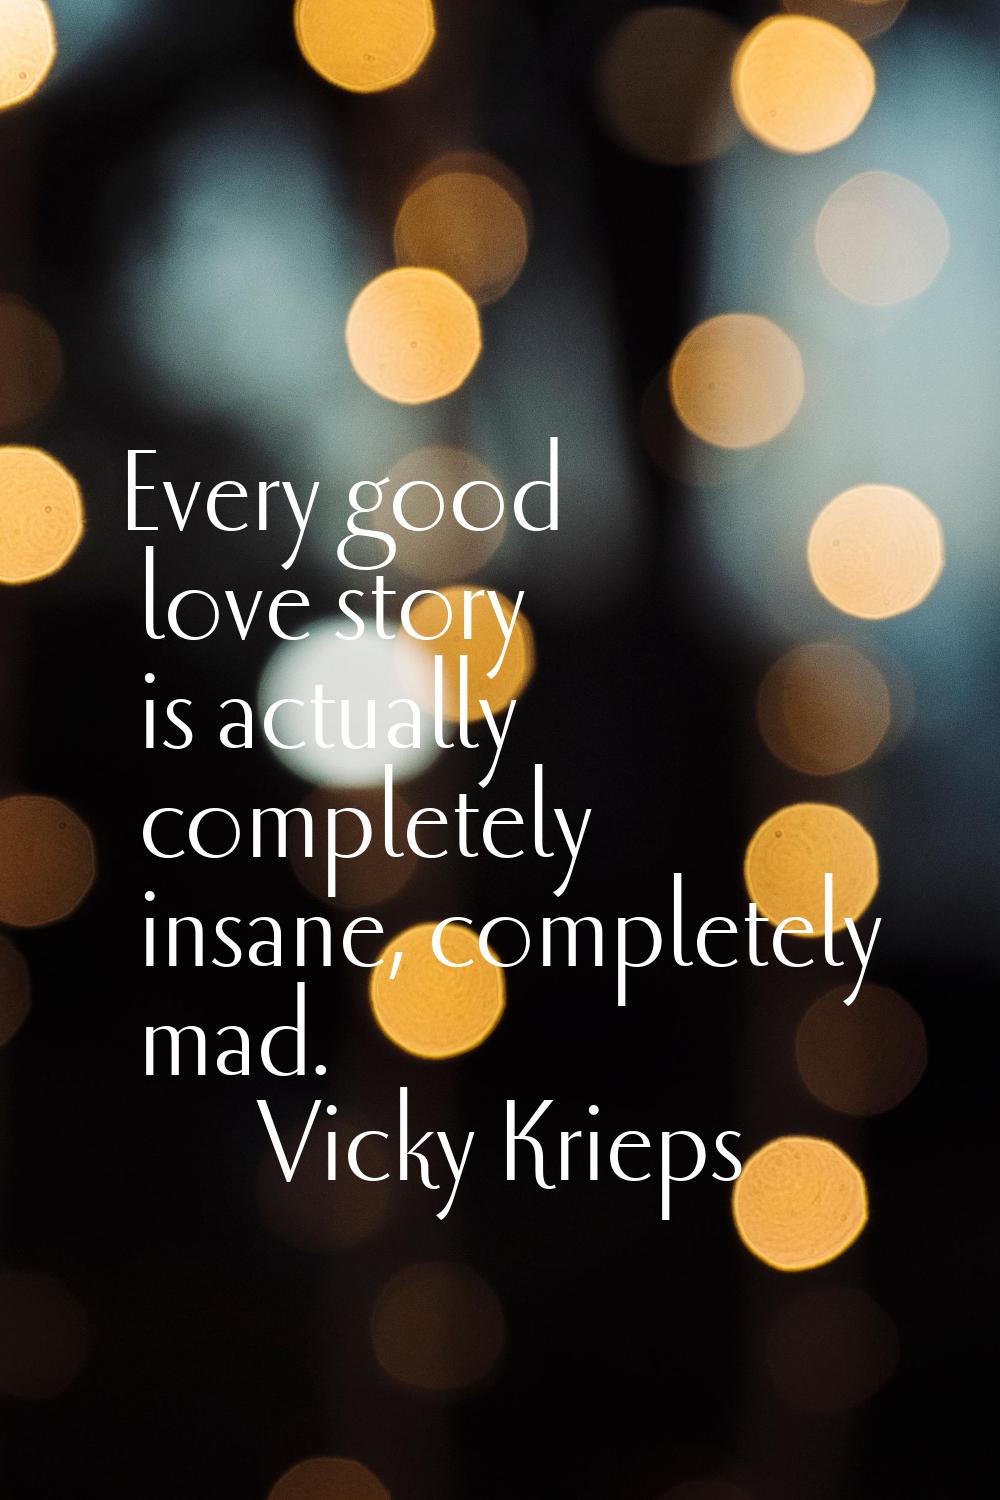 Every good love story is actually completely insane, completely mad.